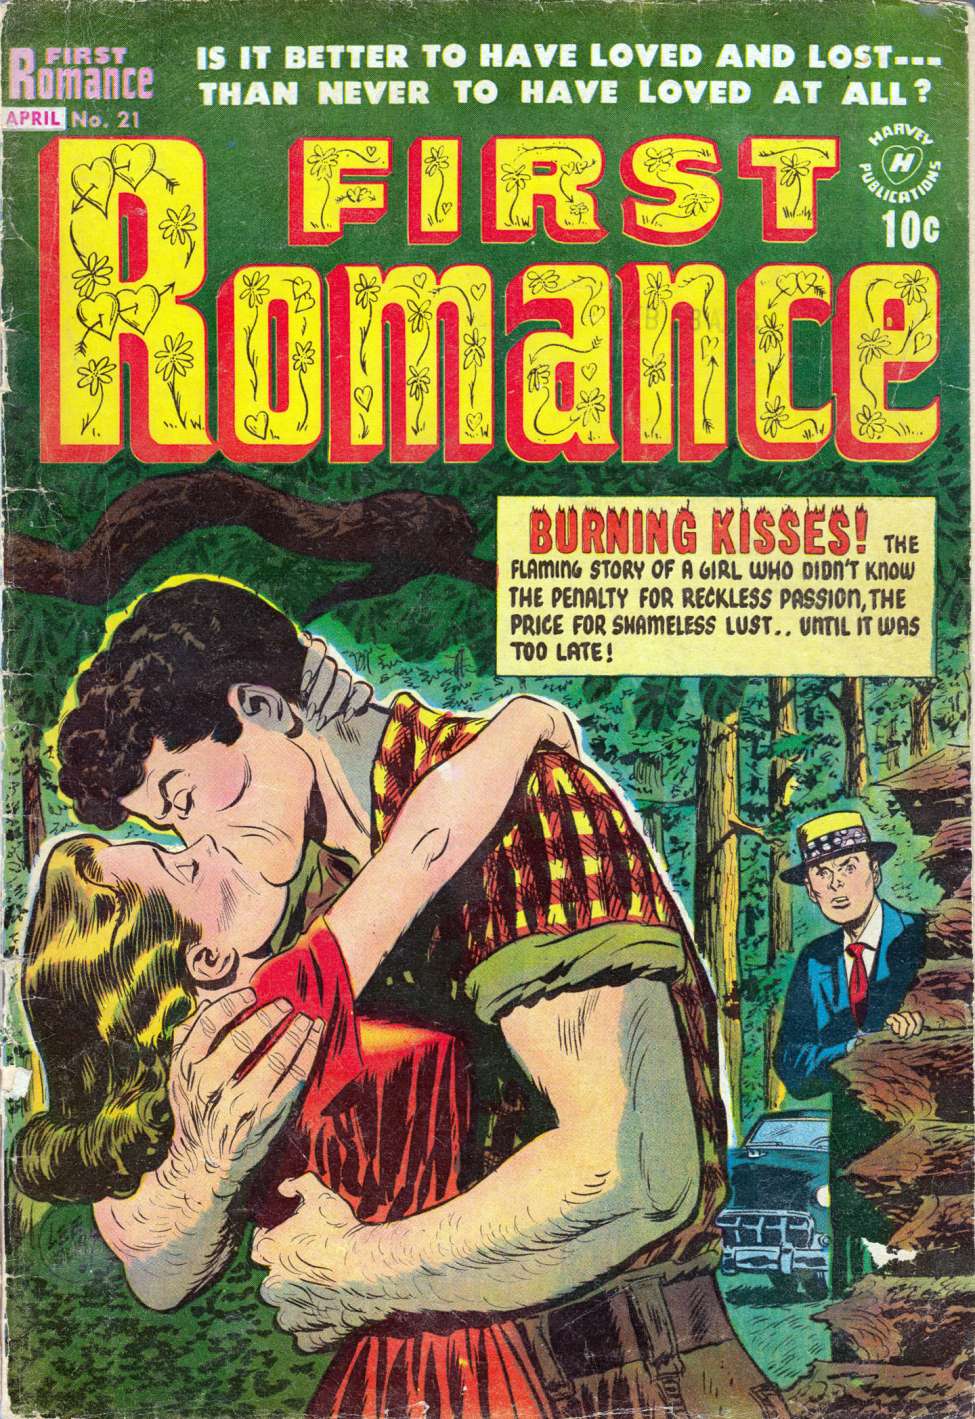 Comic Book Cover For First Romance Magazine 21